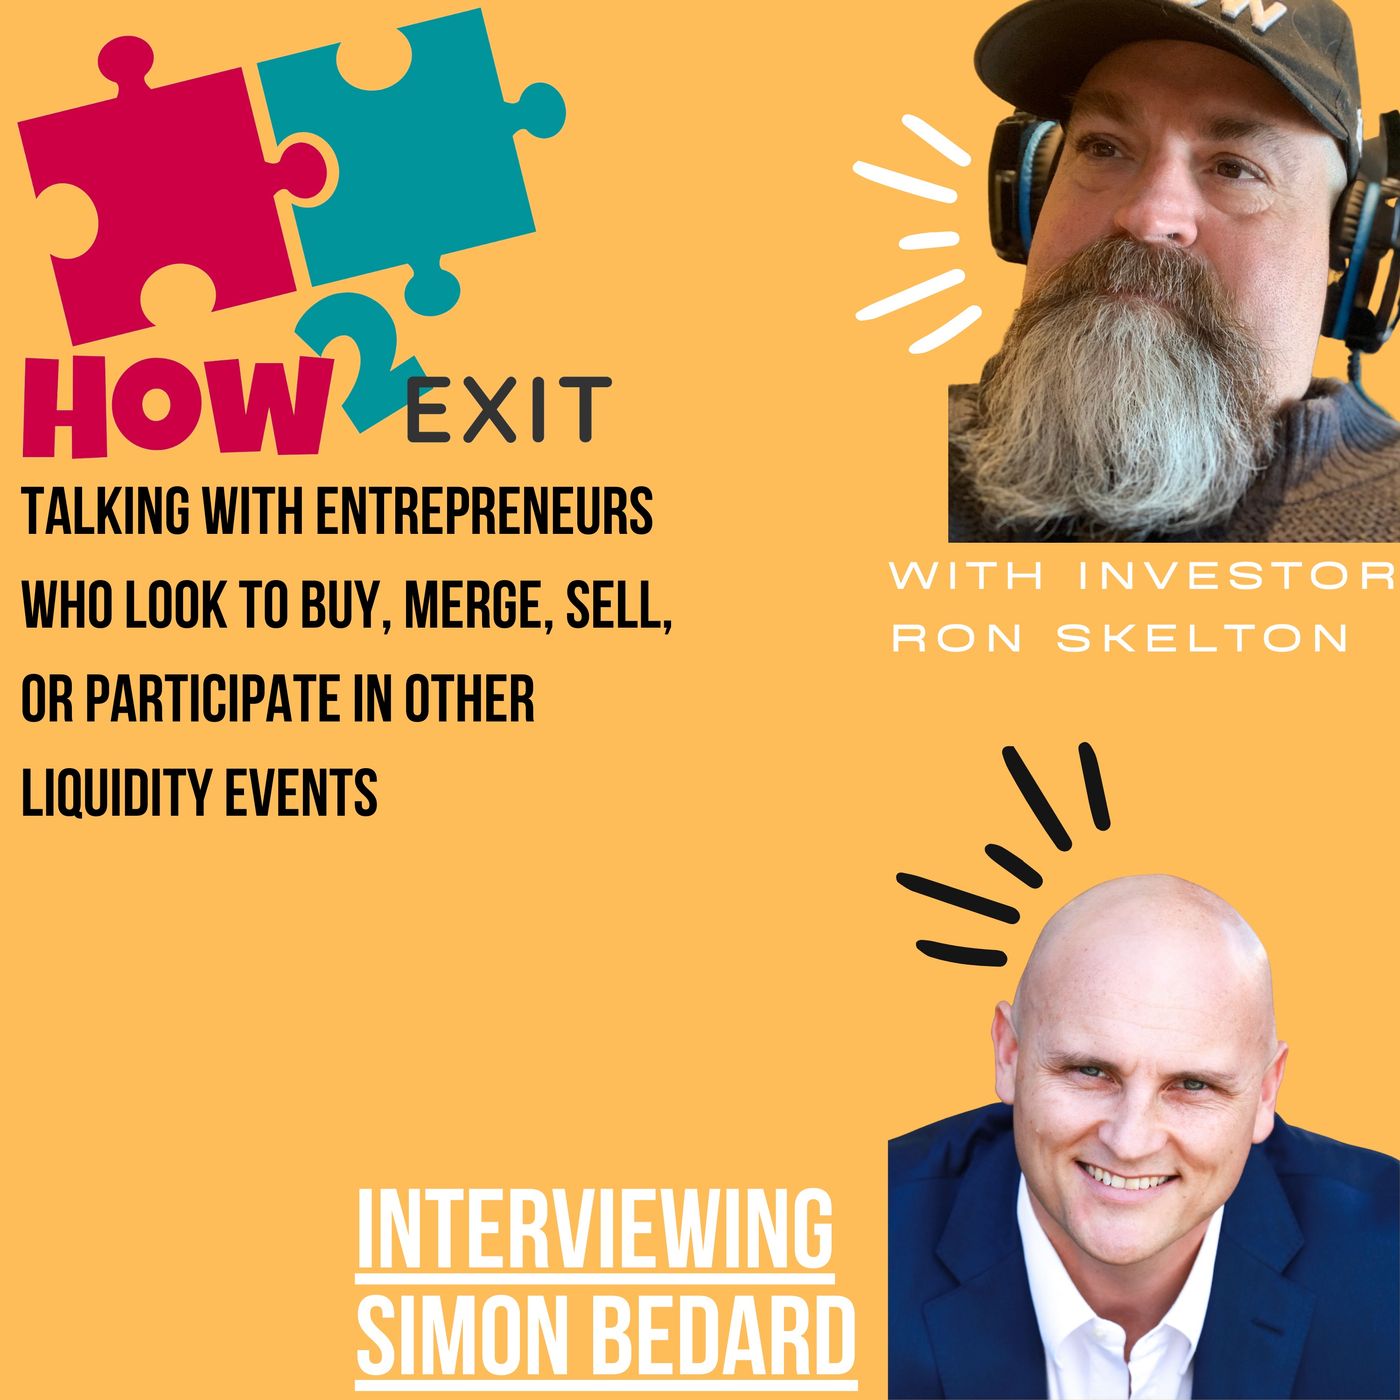 How2Exit Episode 26: Simon Bedard - Founder and CEO of Exit Advisory Group, M&A firm in Australia. Image